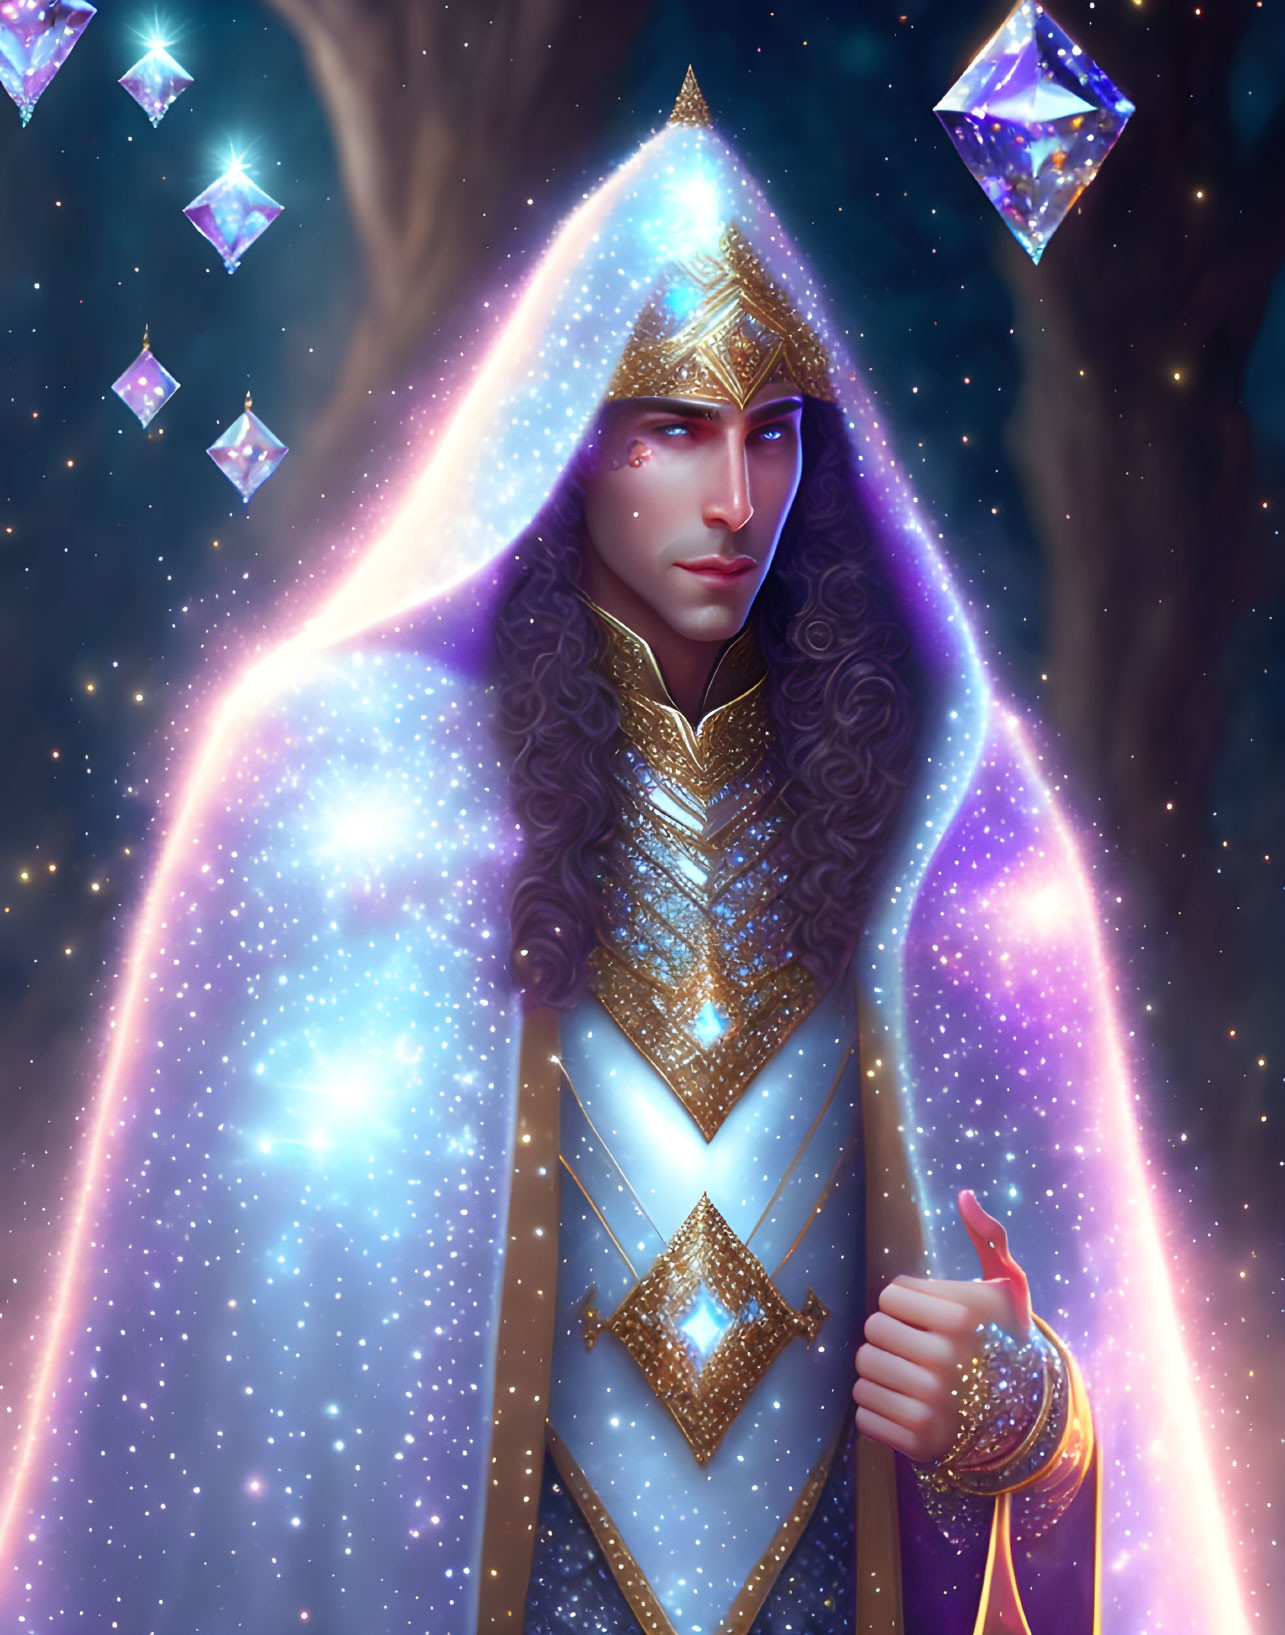 Majestic male figure in golden armor with long hair and crystals